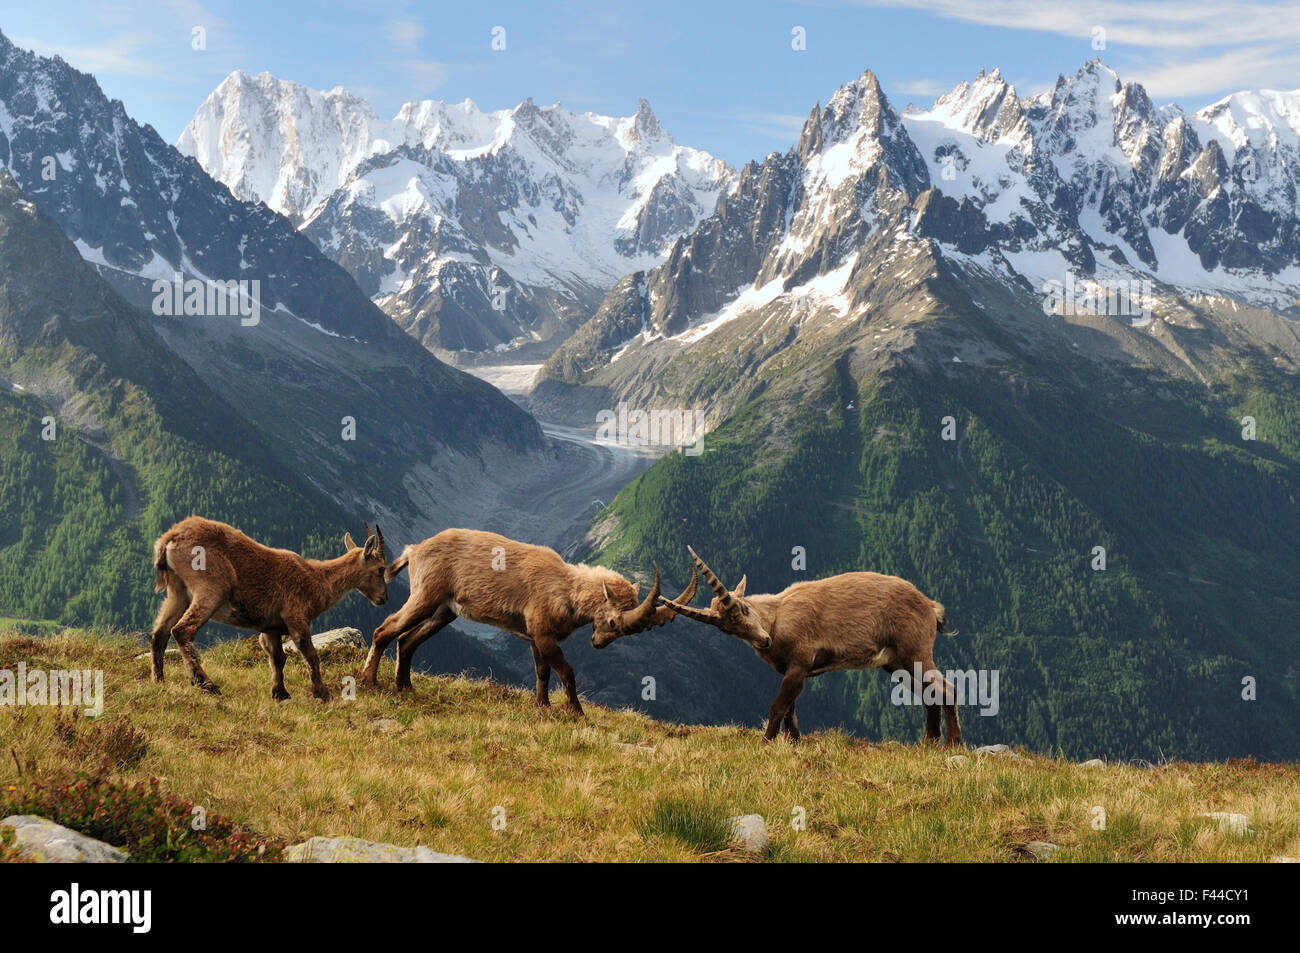 Two male Alpine ibex (Capra ibex ibex) fighting in front of the Mer de Glace glacier, with a female watching, Aiguilles Rouges (Red Peaks) Regional Natural Park, Haute-Savoie, France, June. Stock Photo